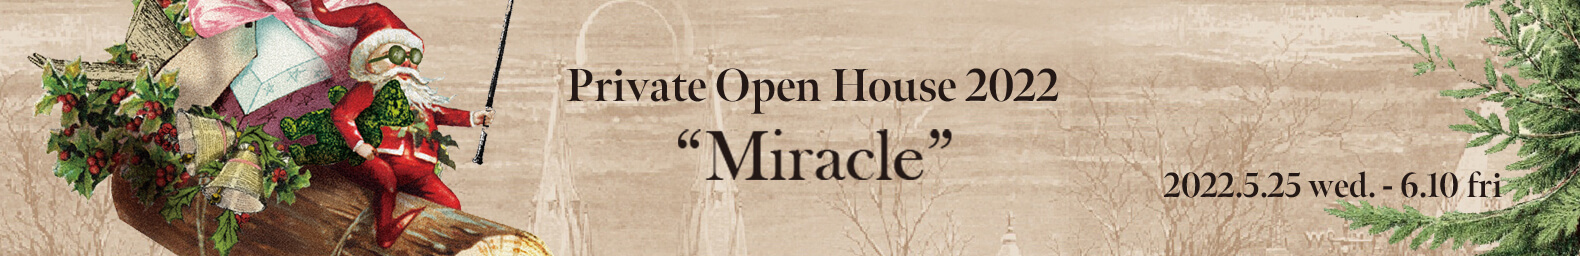 Private Open House 2022 “Miracle”